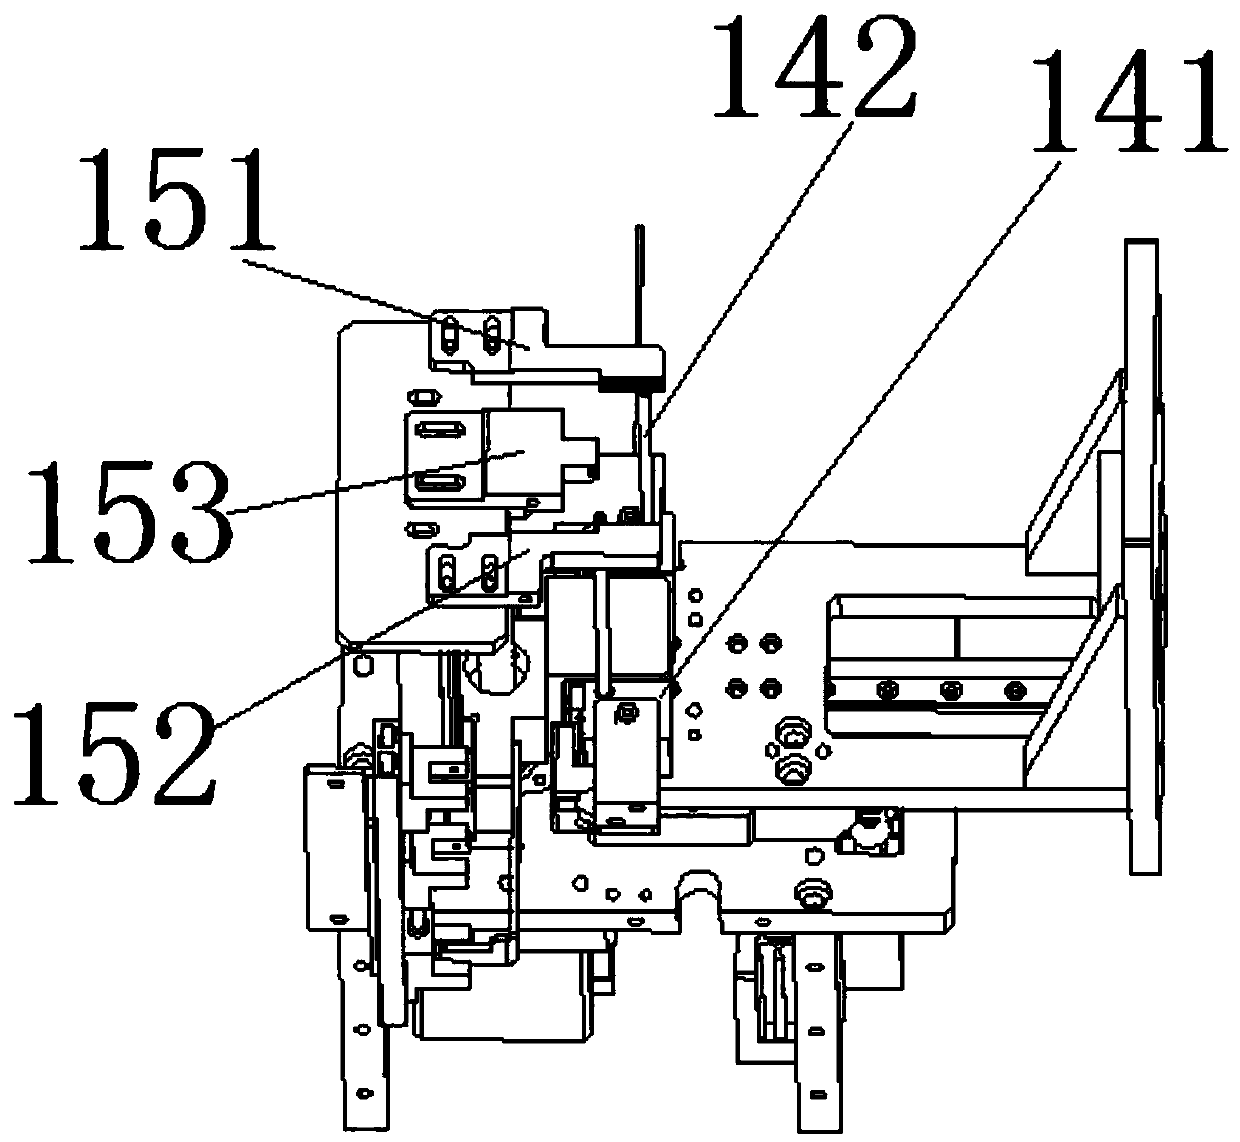 An automatic film tearing device